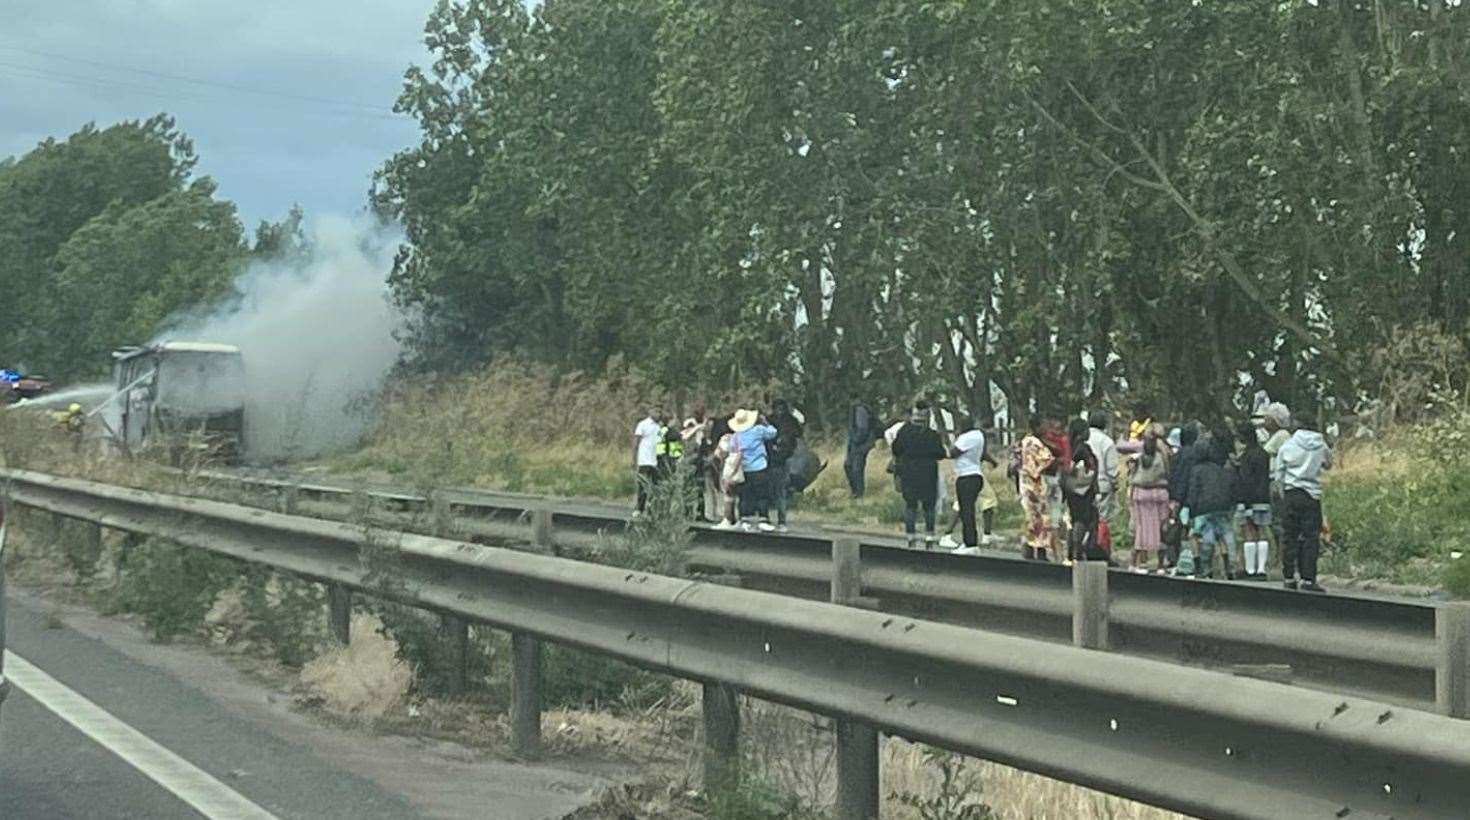 A coach fire has caused havoc on the M2 coastbound today